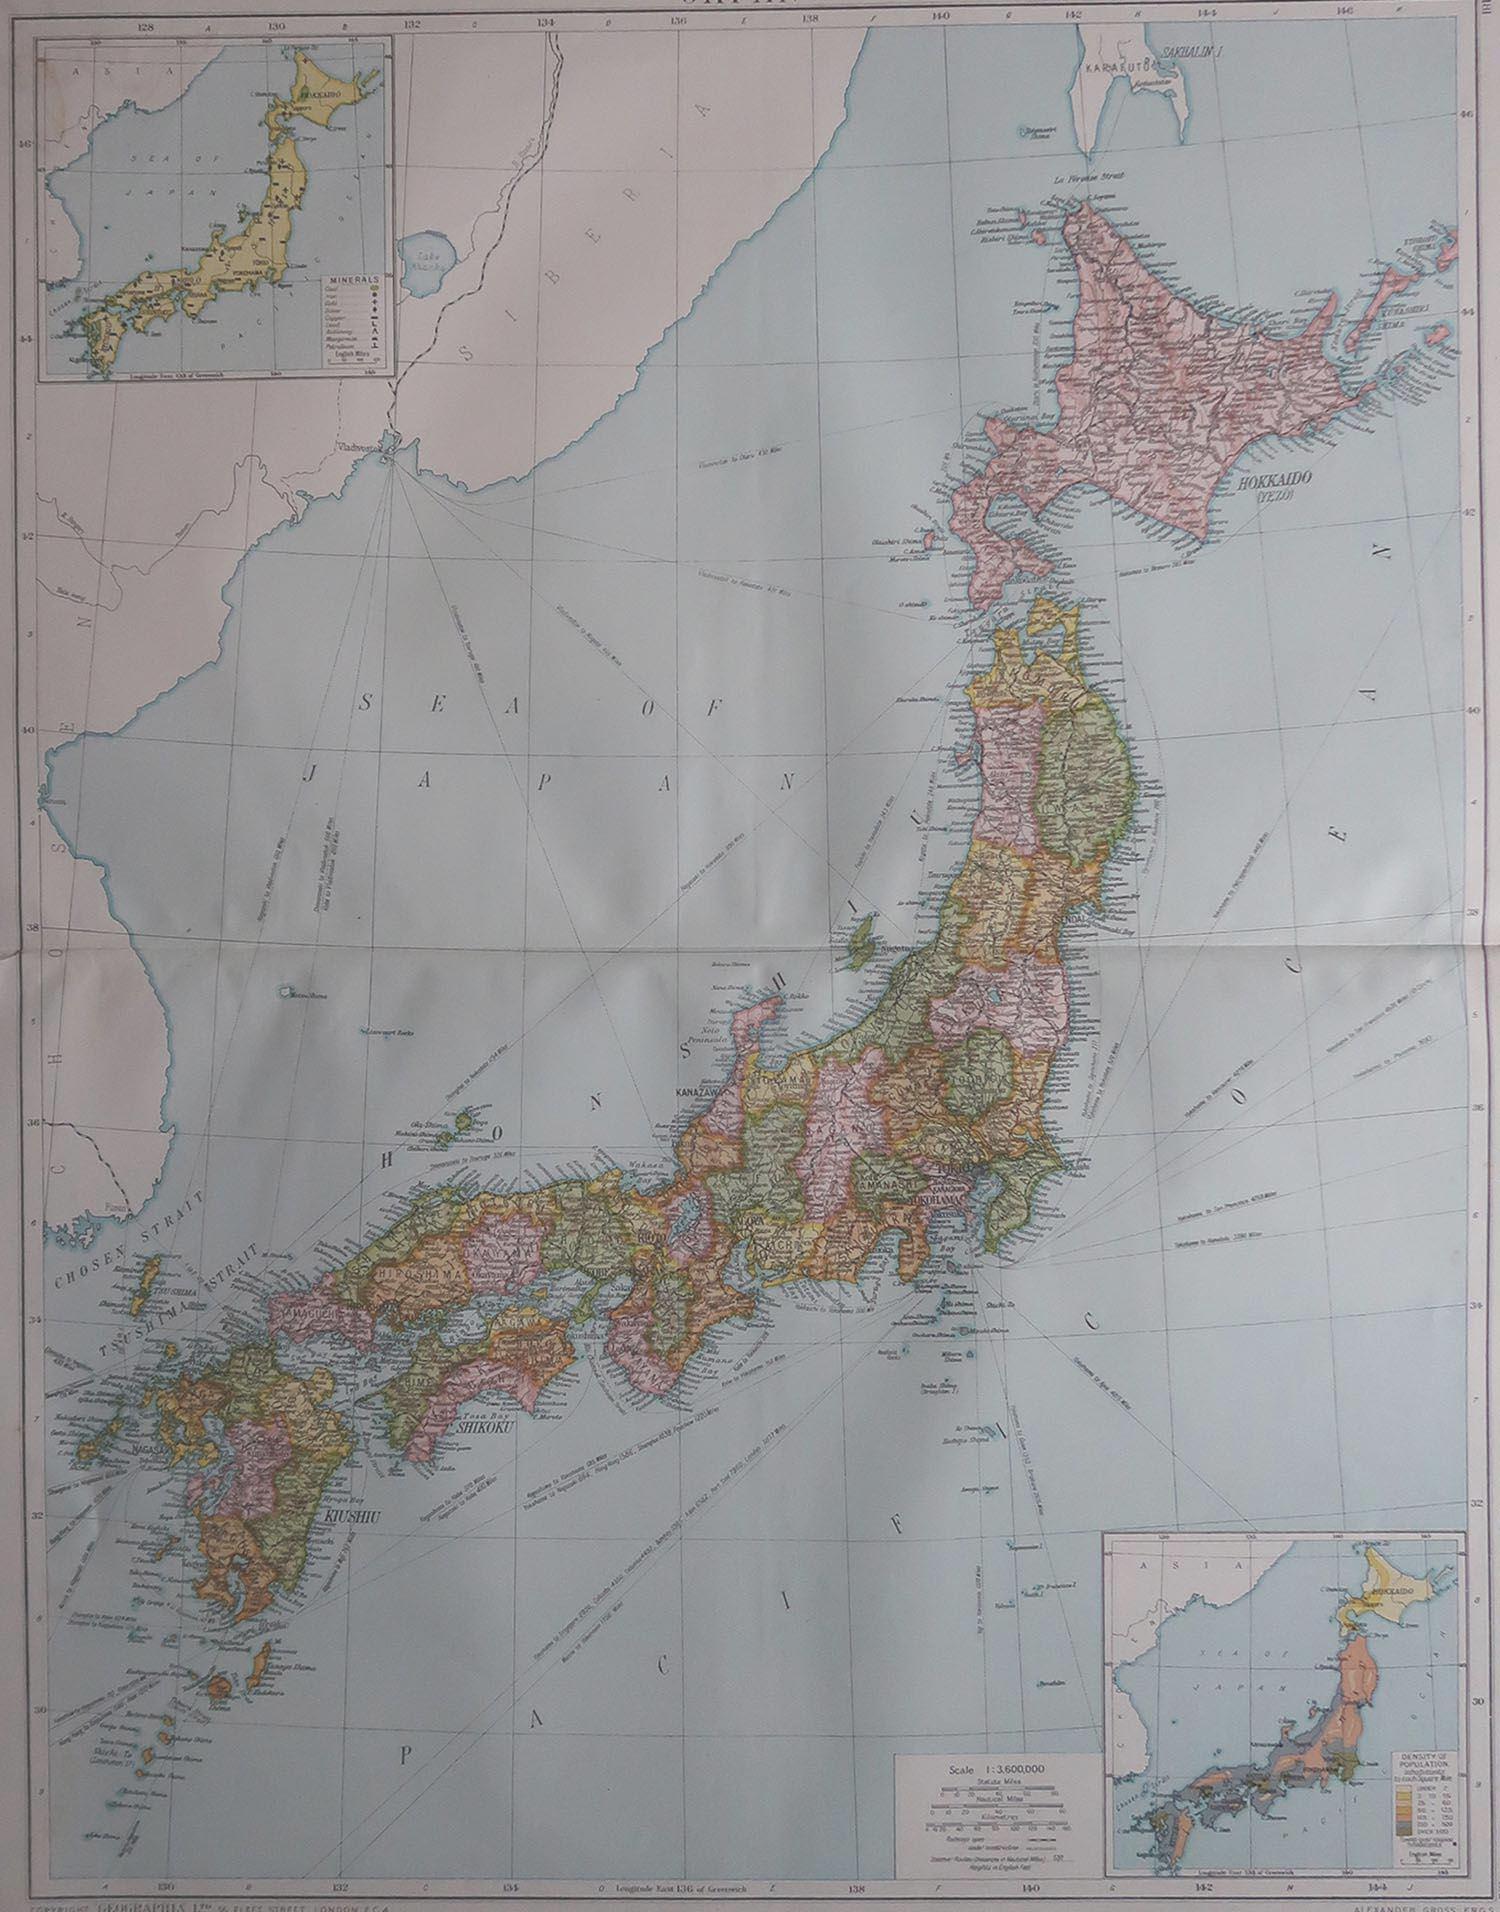 Great map of Japan

Original color. Good condition

Published by Alexander Gross

Unframed.








